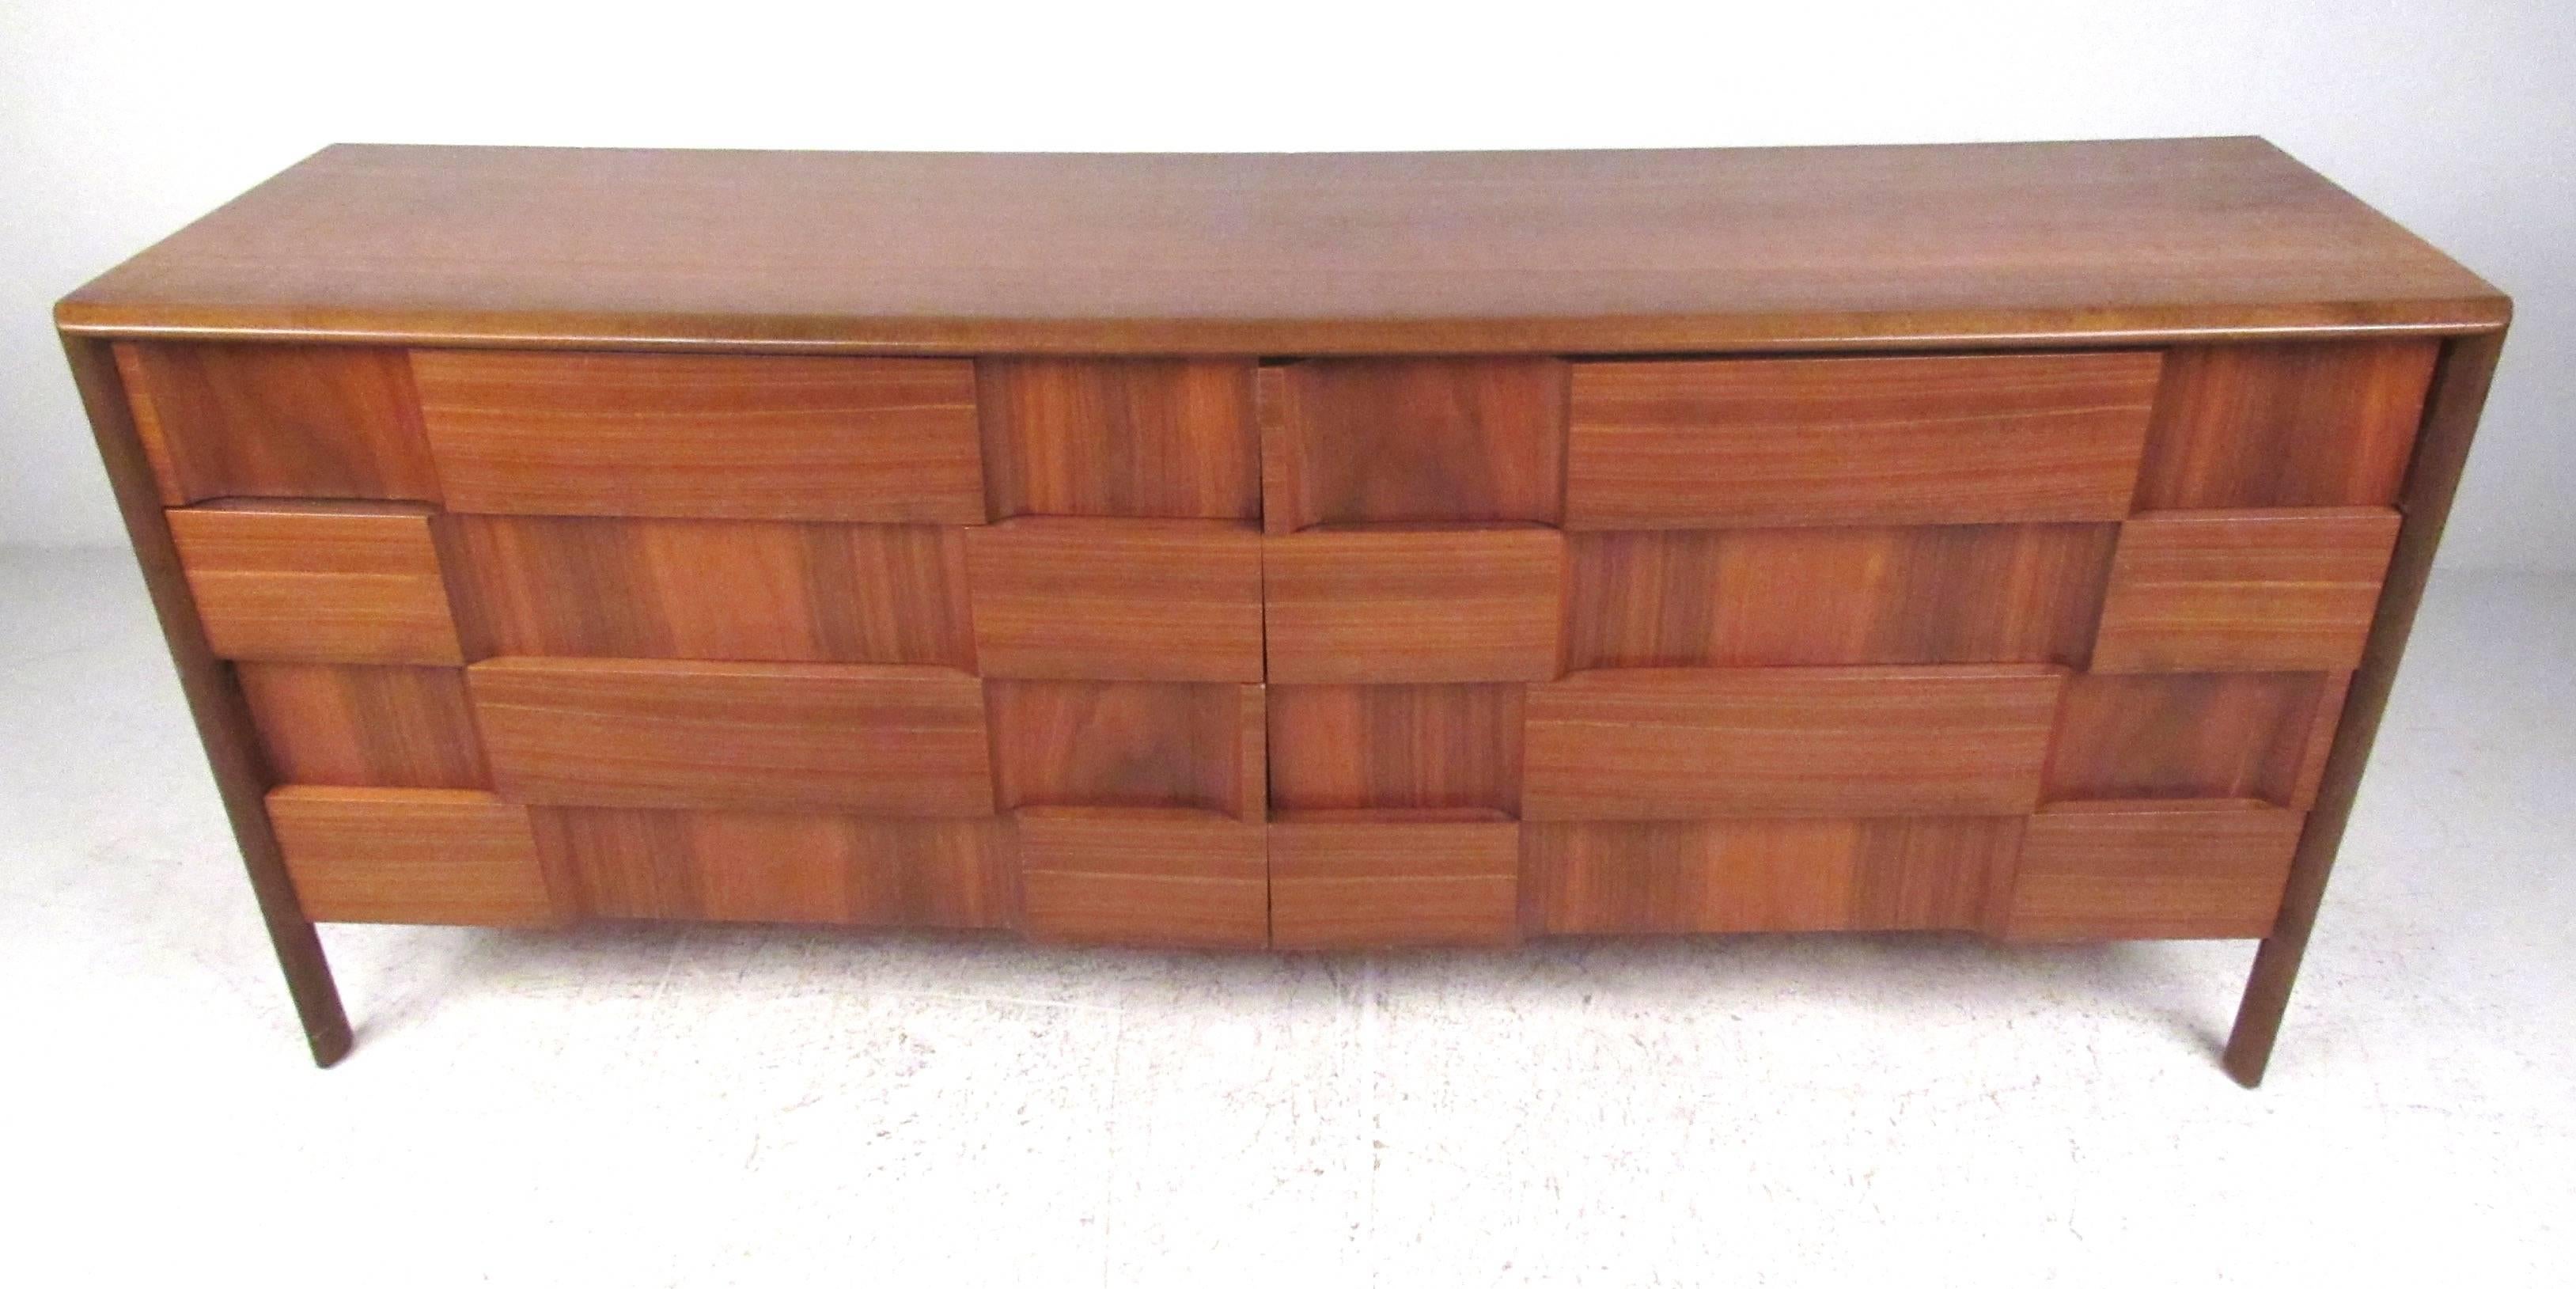 Eight-drawer walnut dresser by Edmond Spence, Sweden, circa 1960 makes an ideal nine drawer dresser, perfect for home bedroom. Sculptred checkerboard front makes an impressive addition to any interior, please confirm item location (NY or NJ). 